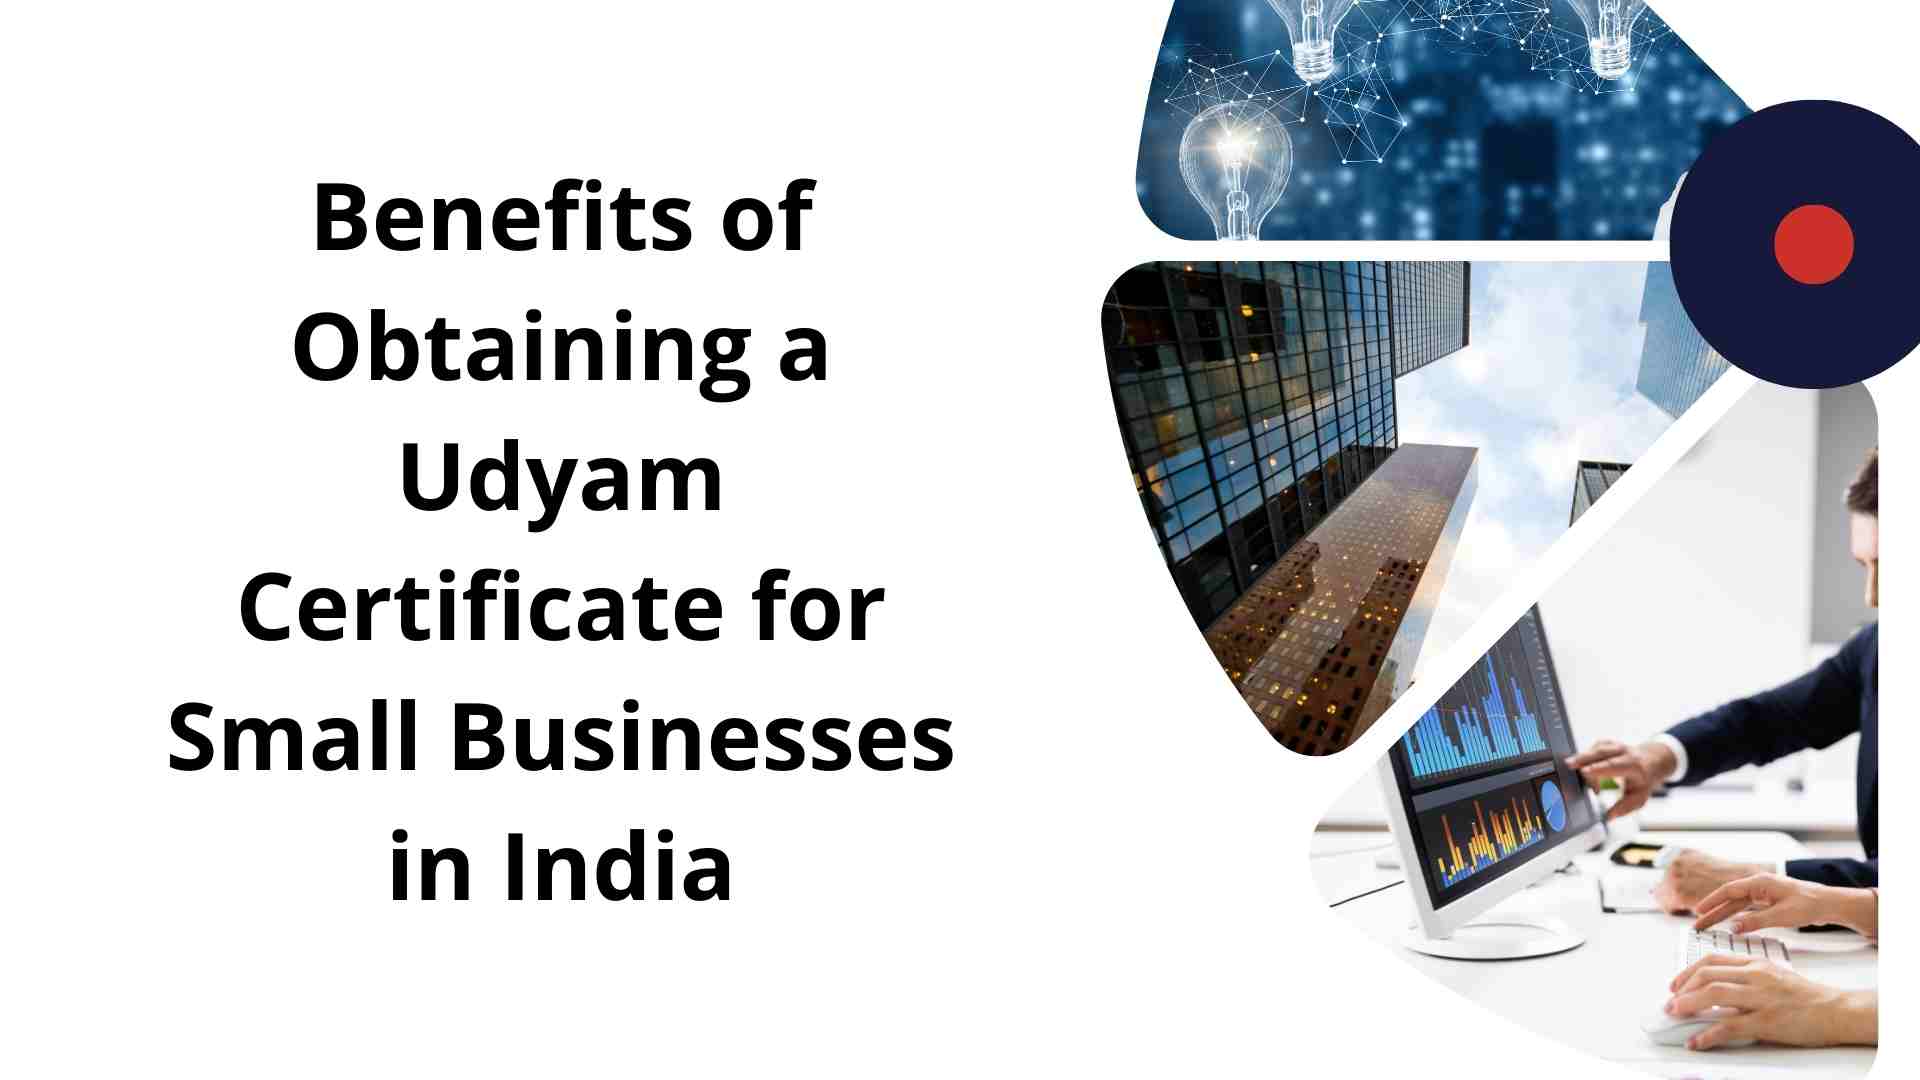 Benefits of Obtaining a Udyam Certificate for Small Businesses in India